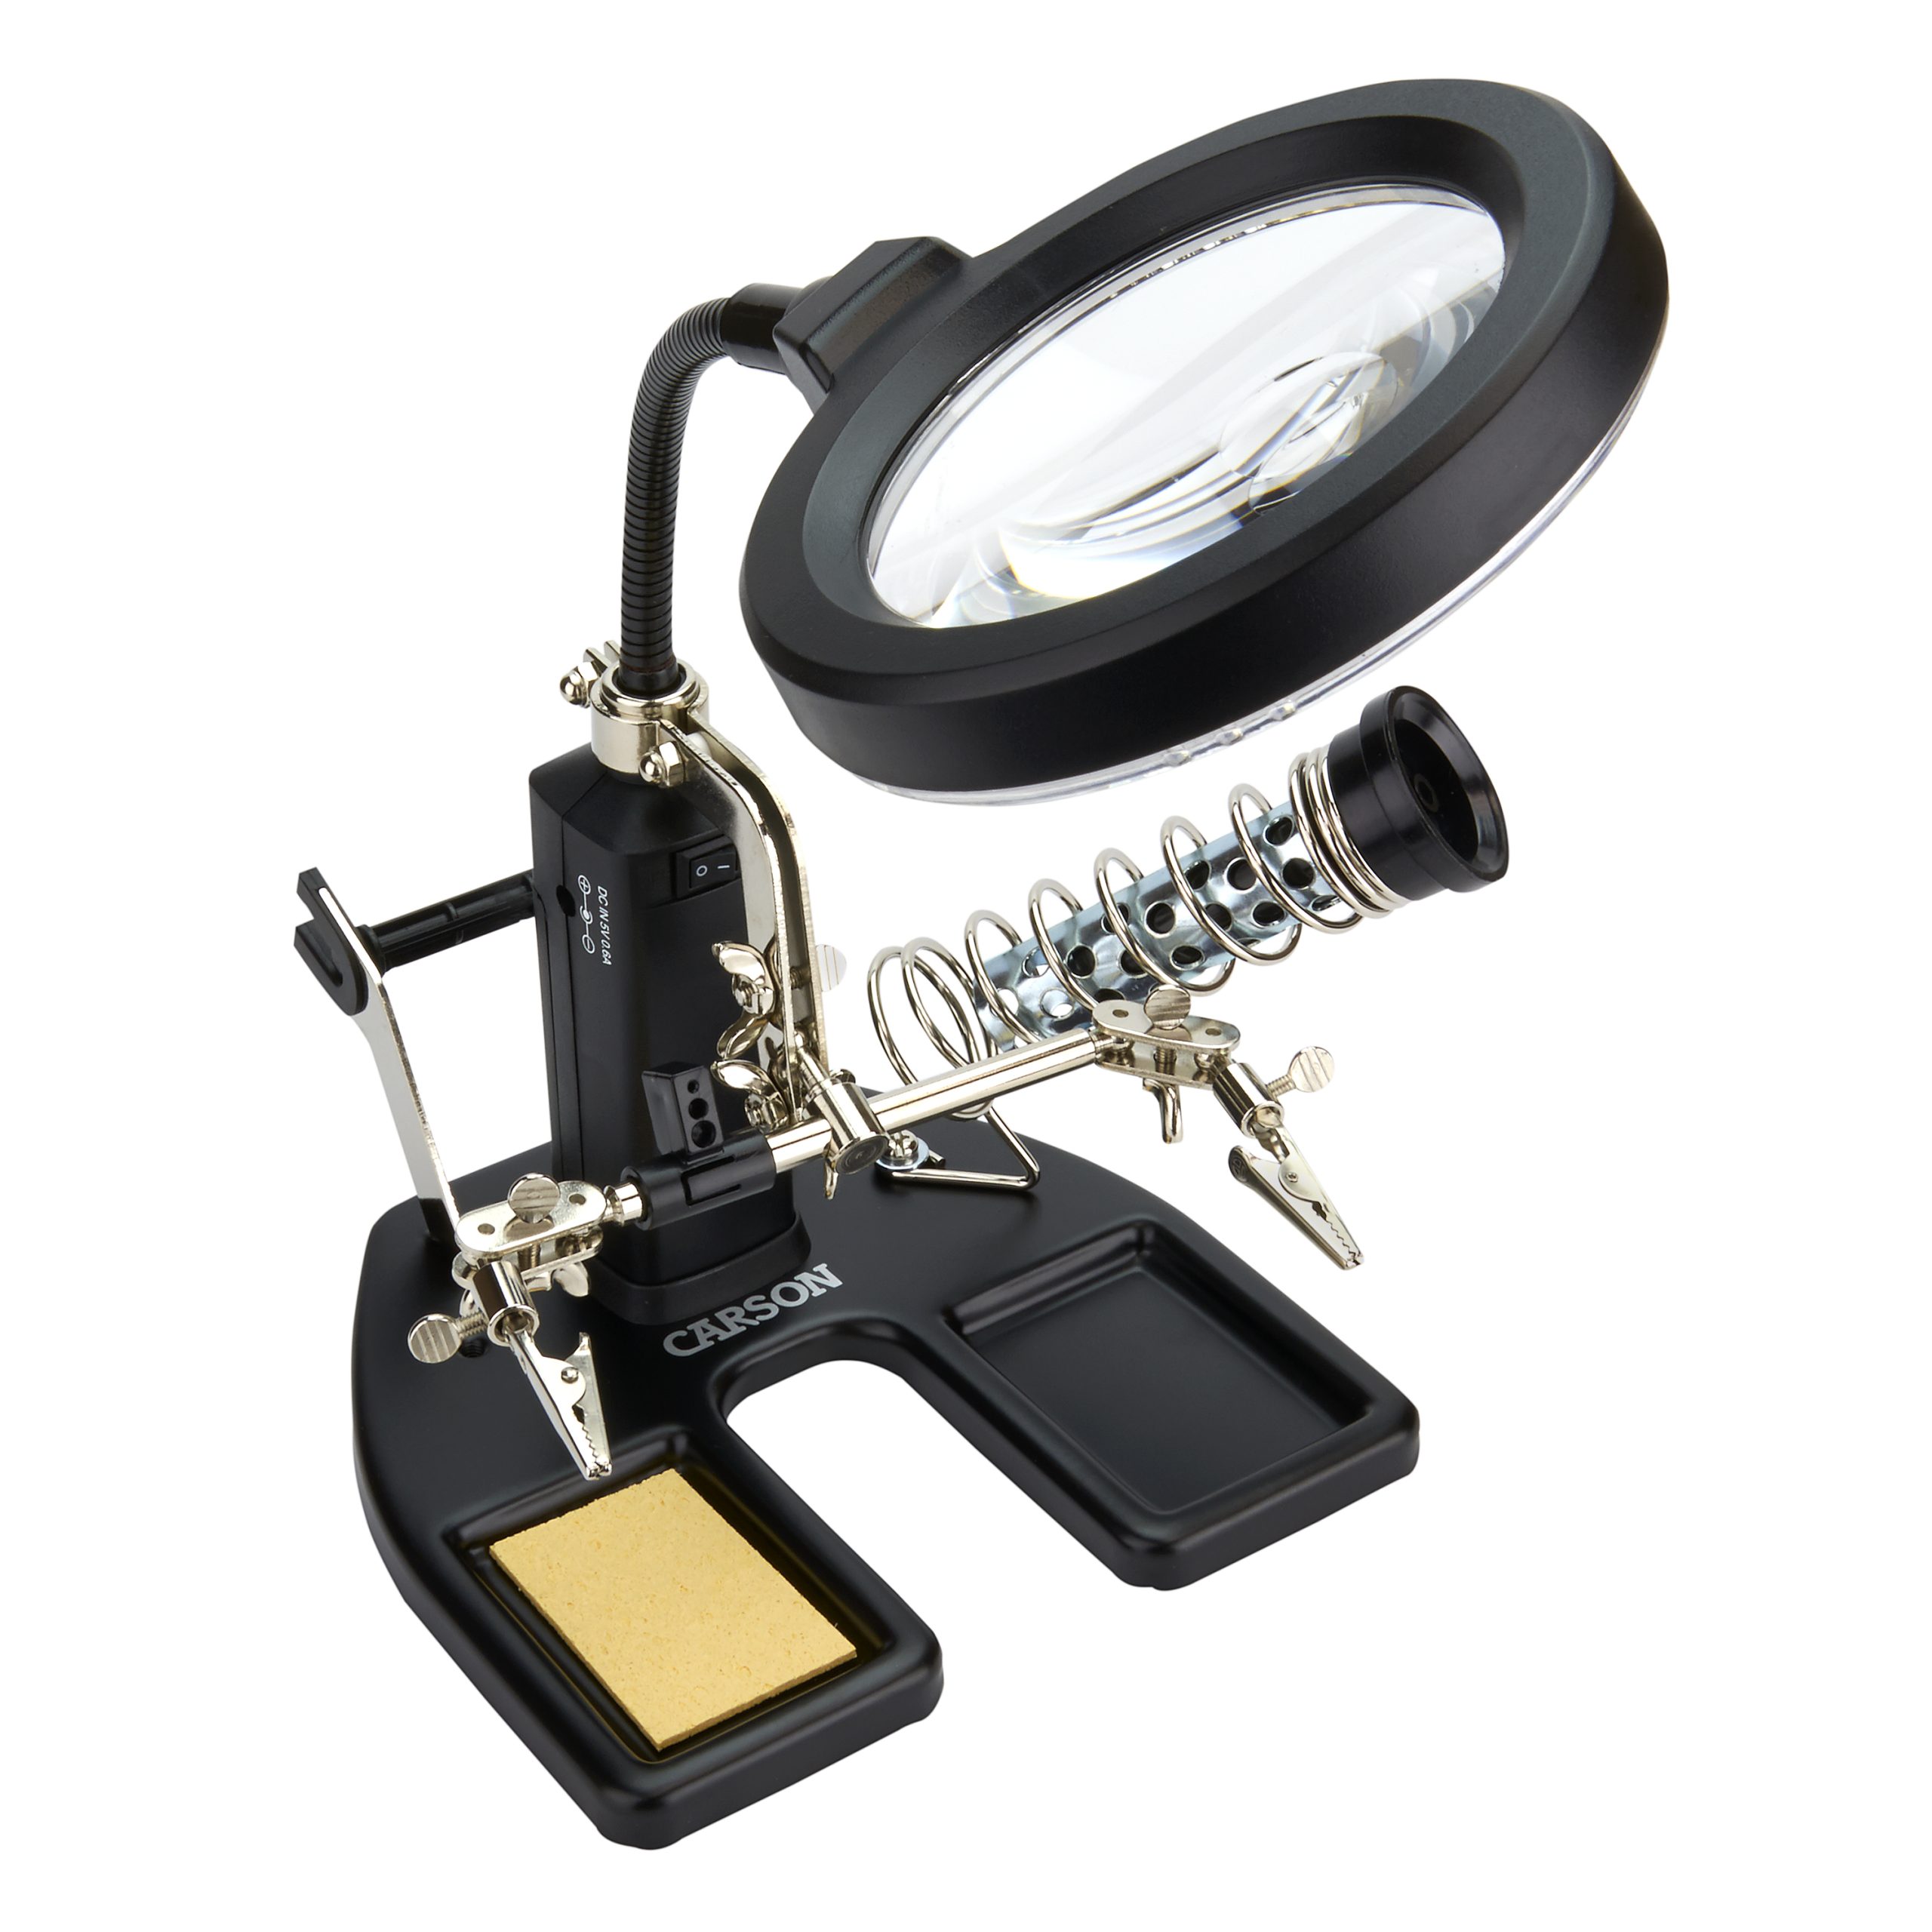 SolderMag 1.75x Power LED Lit Soldering Magnifier with 4.5x Spot Lens –  Carson Optical